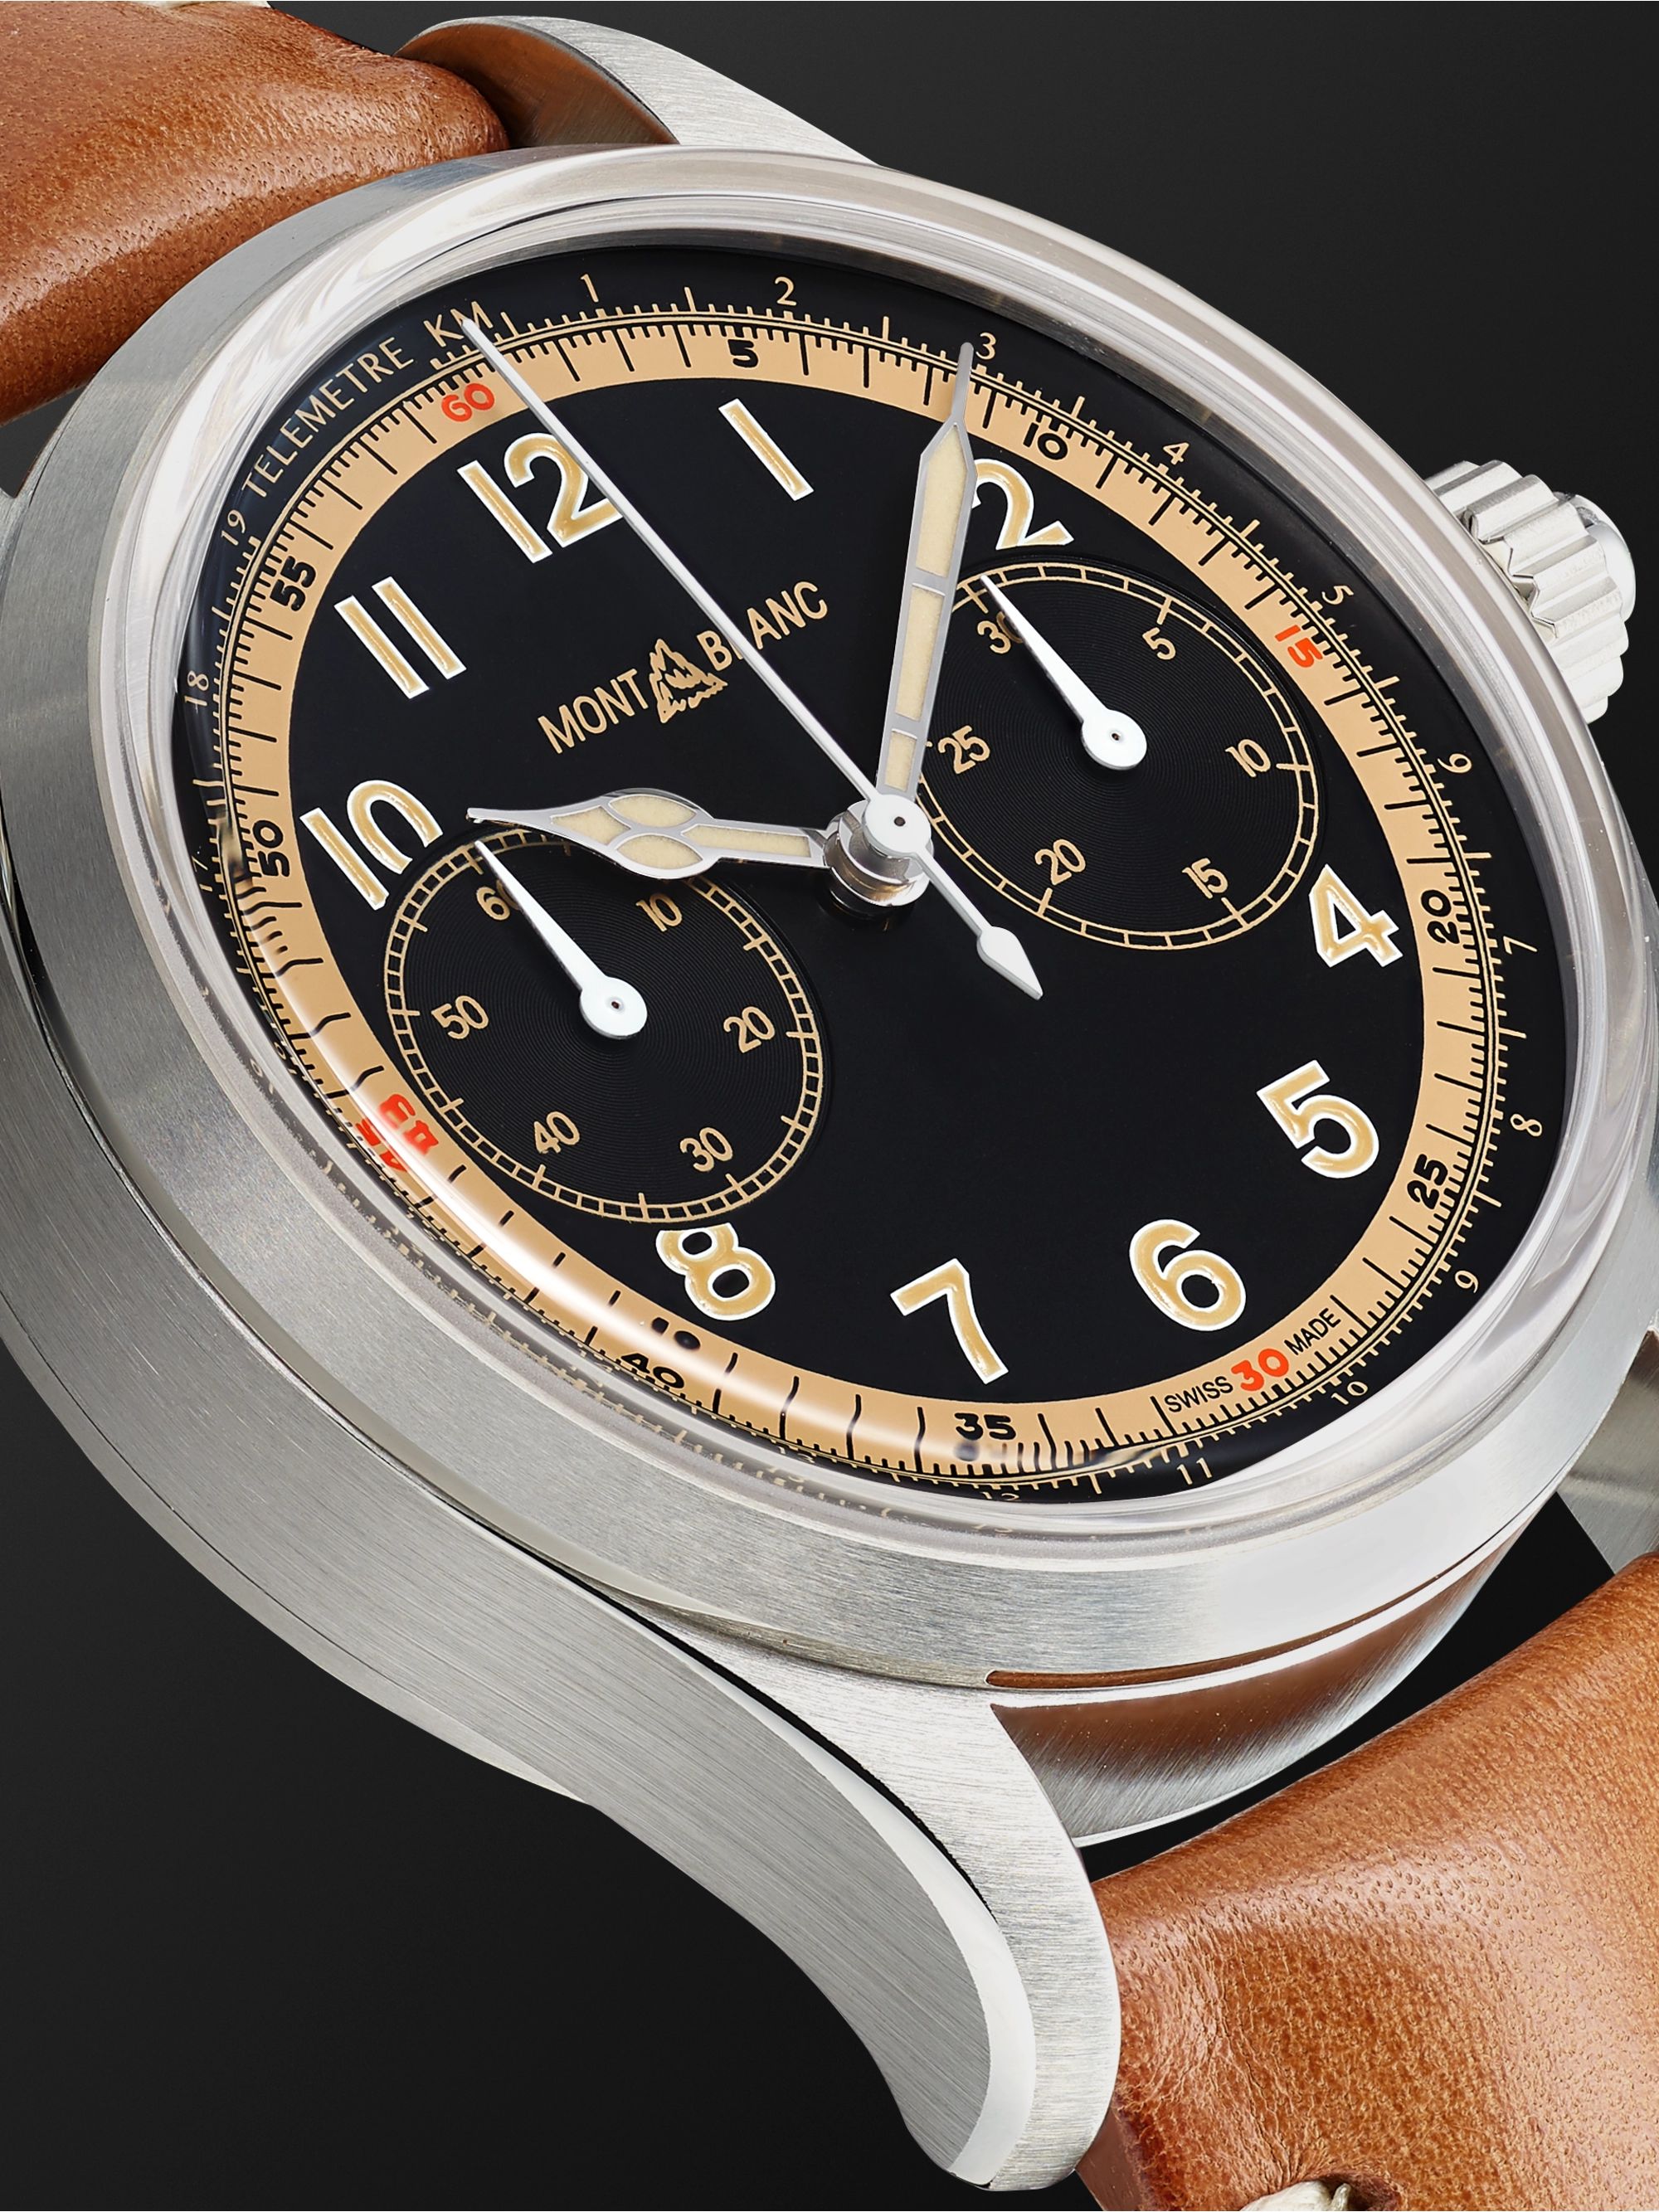 MONTBLANC 1858 Monopusher Automatic Chronograph 42mm Stainless Steel and Leather Watch, Ref. No. 125581